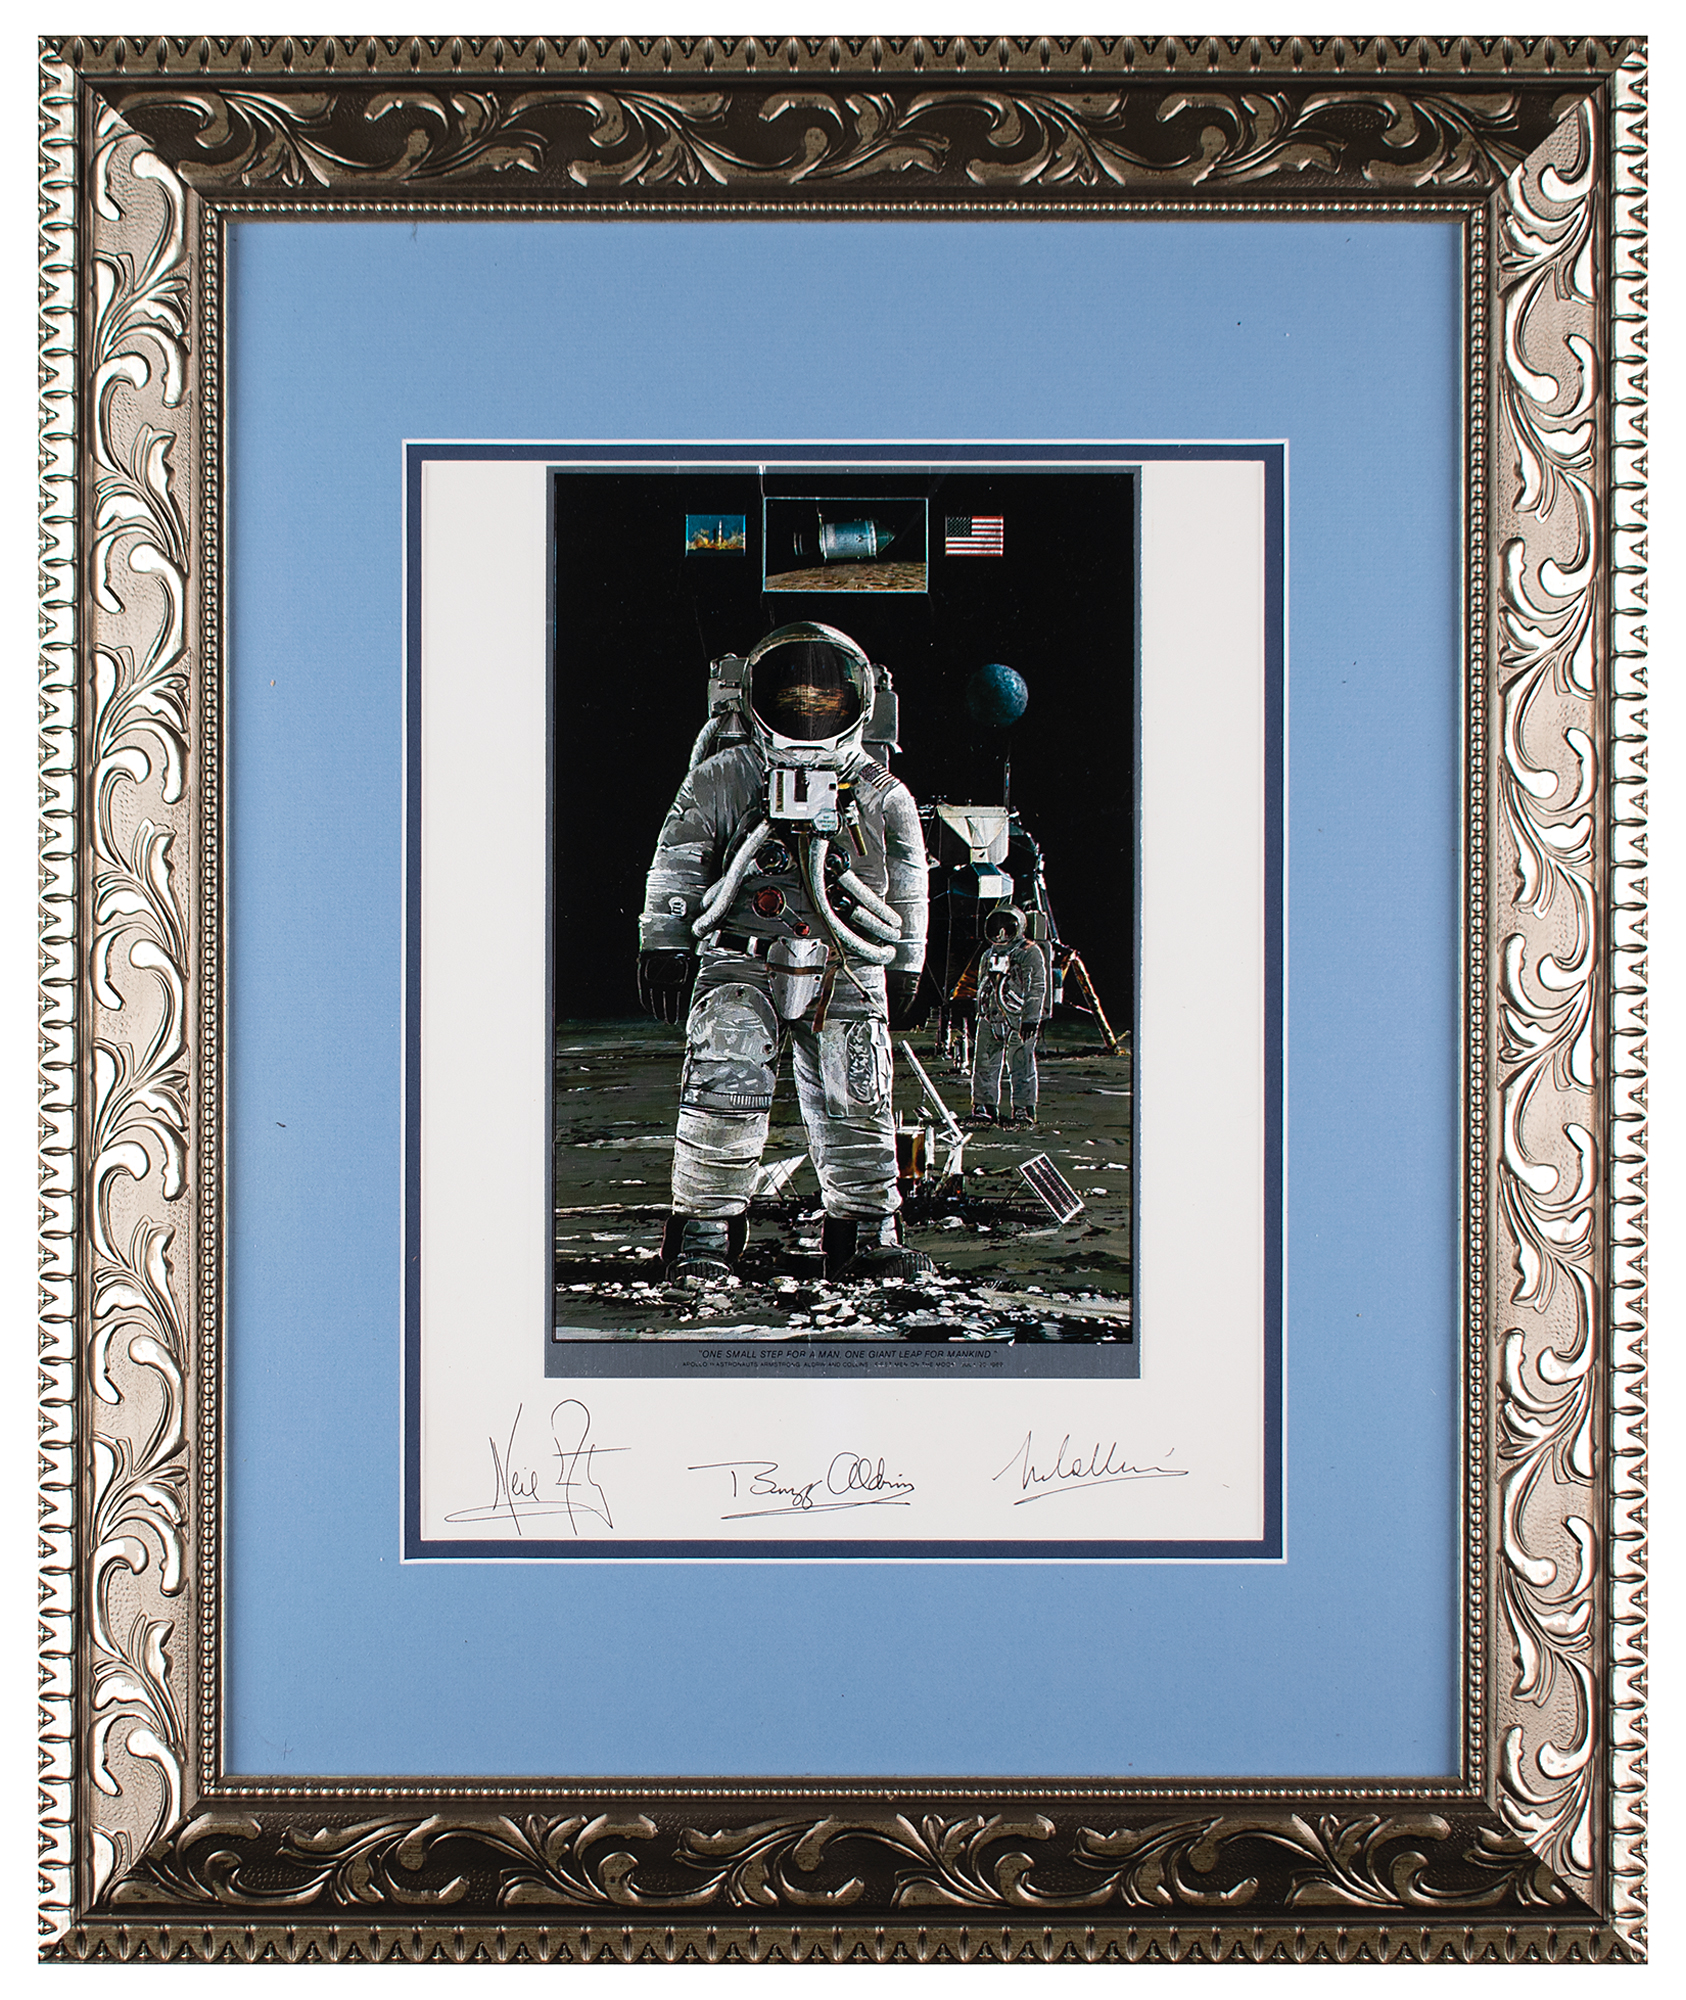 Lot #629 Apollo 11 Signed Foil Etching